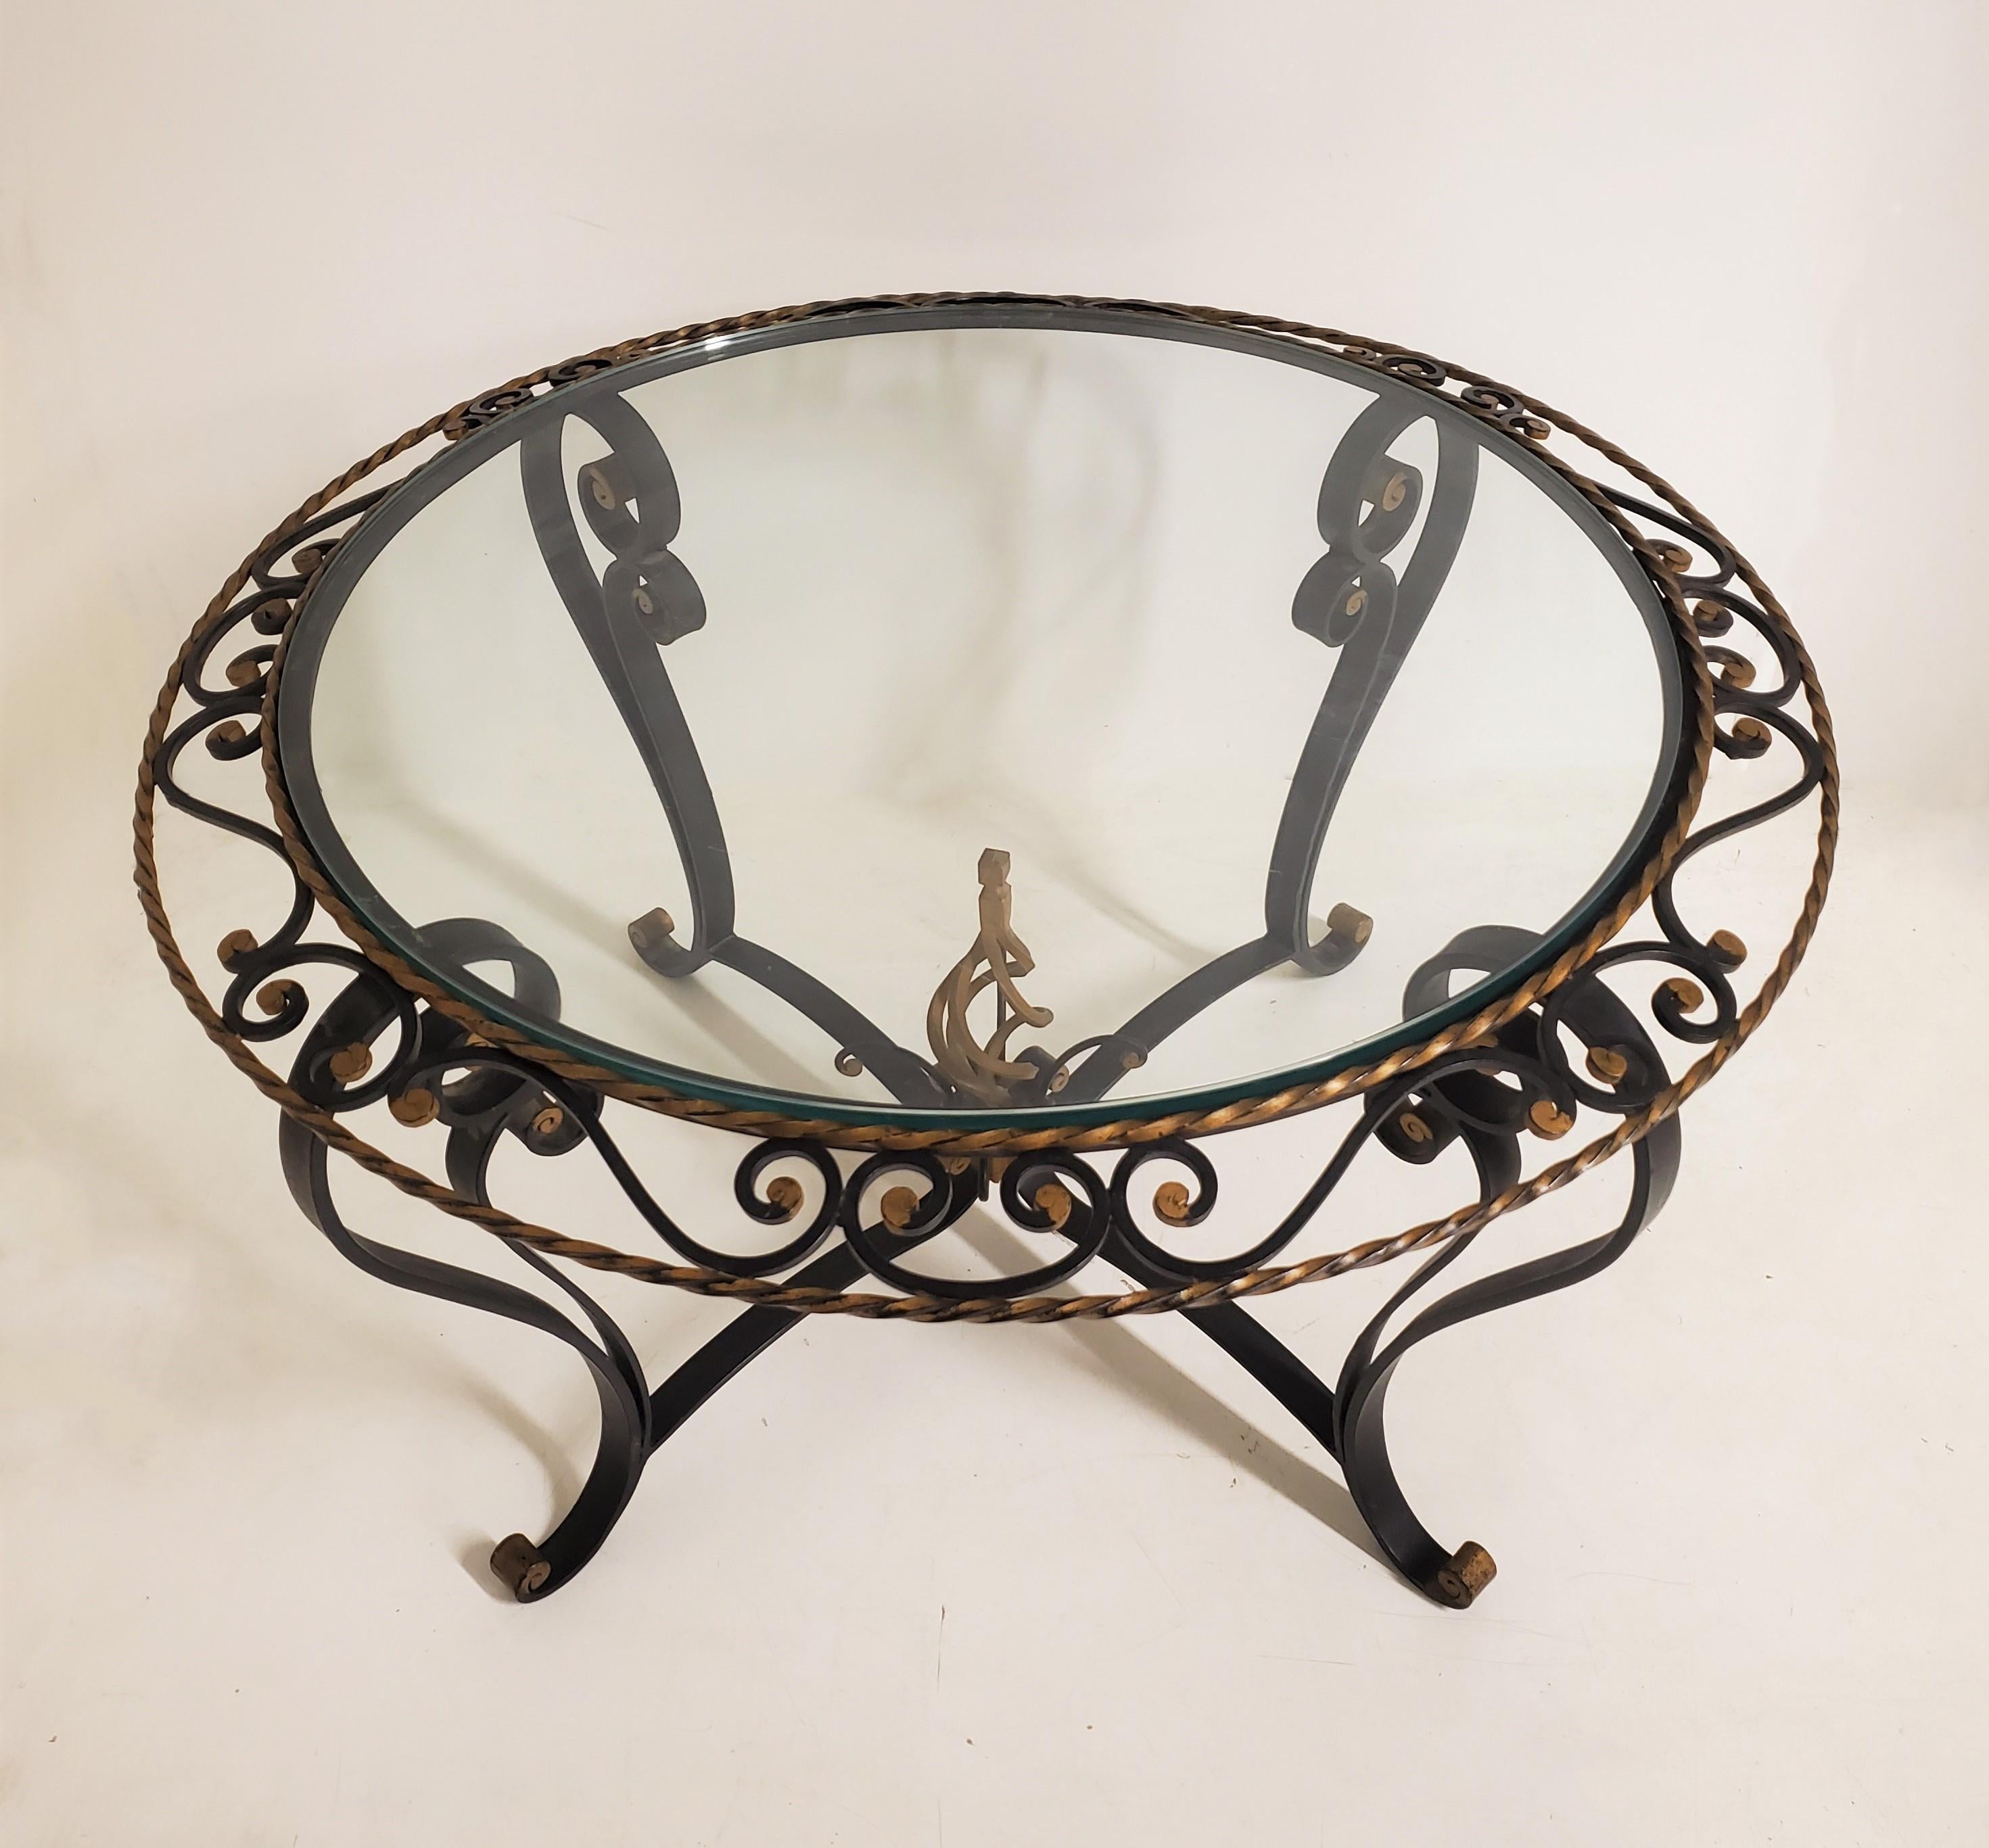 A French Art Deco circular coffee table expertly crafted in hand forged iron and finished in tones of gold and black, attributed to Poillerat 
The combination of the two colors creates a beautiful contrast to enhance any living space. The table